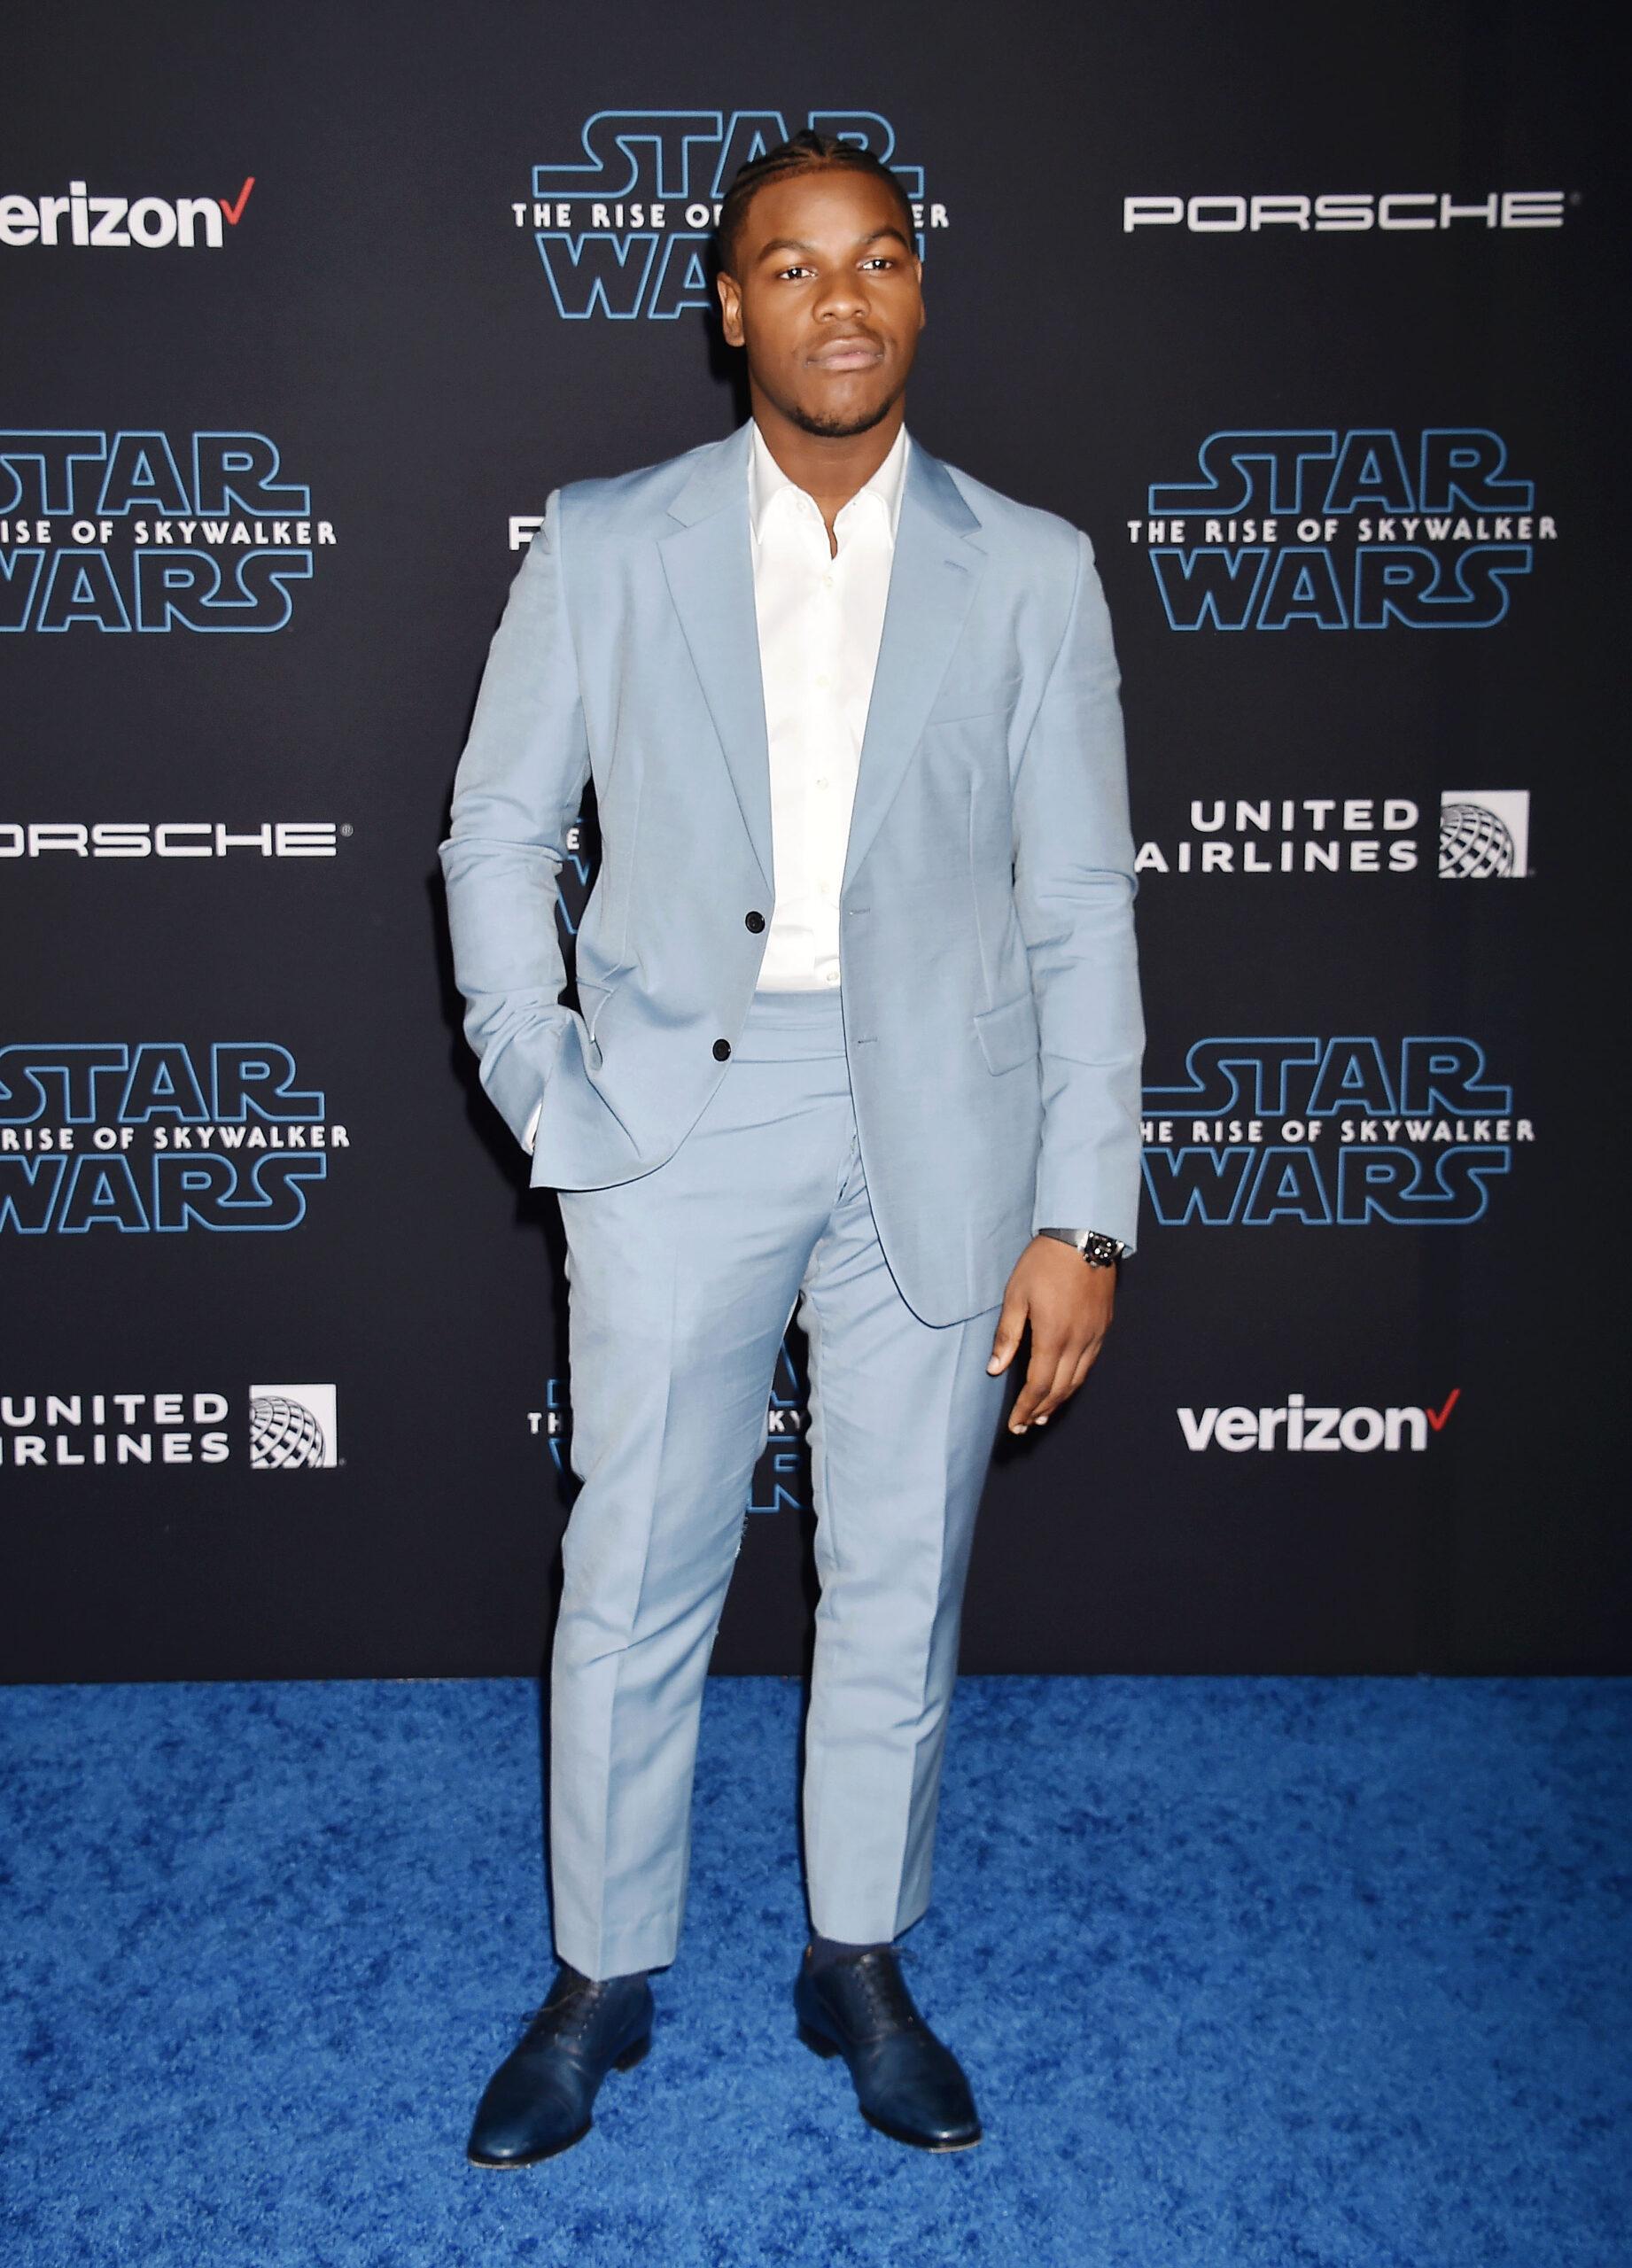 Premiere Of Disney apos s quot Star Wars The Rise Of Skywalker quot - Arrivals